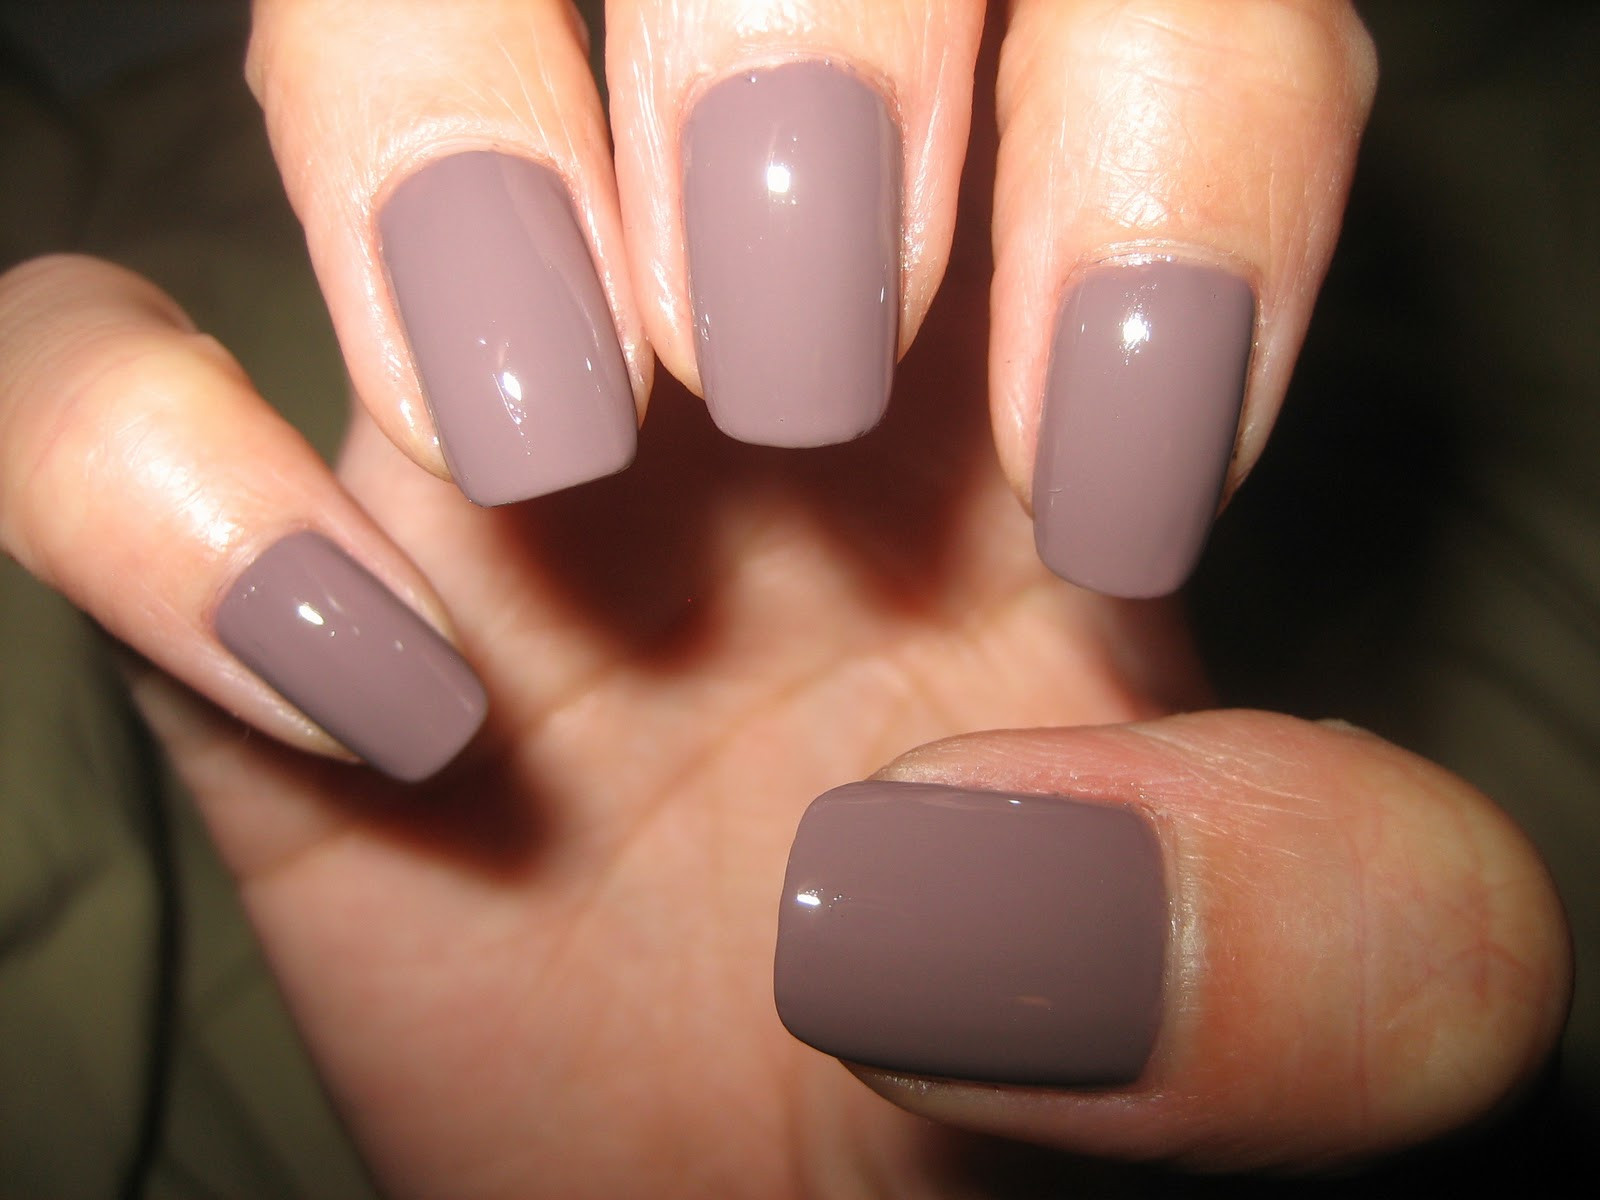 1. "Top 10 Fall Nail Colors for November" - wide 6